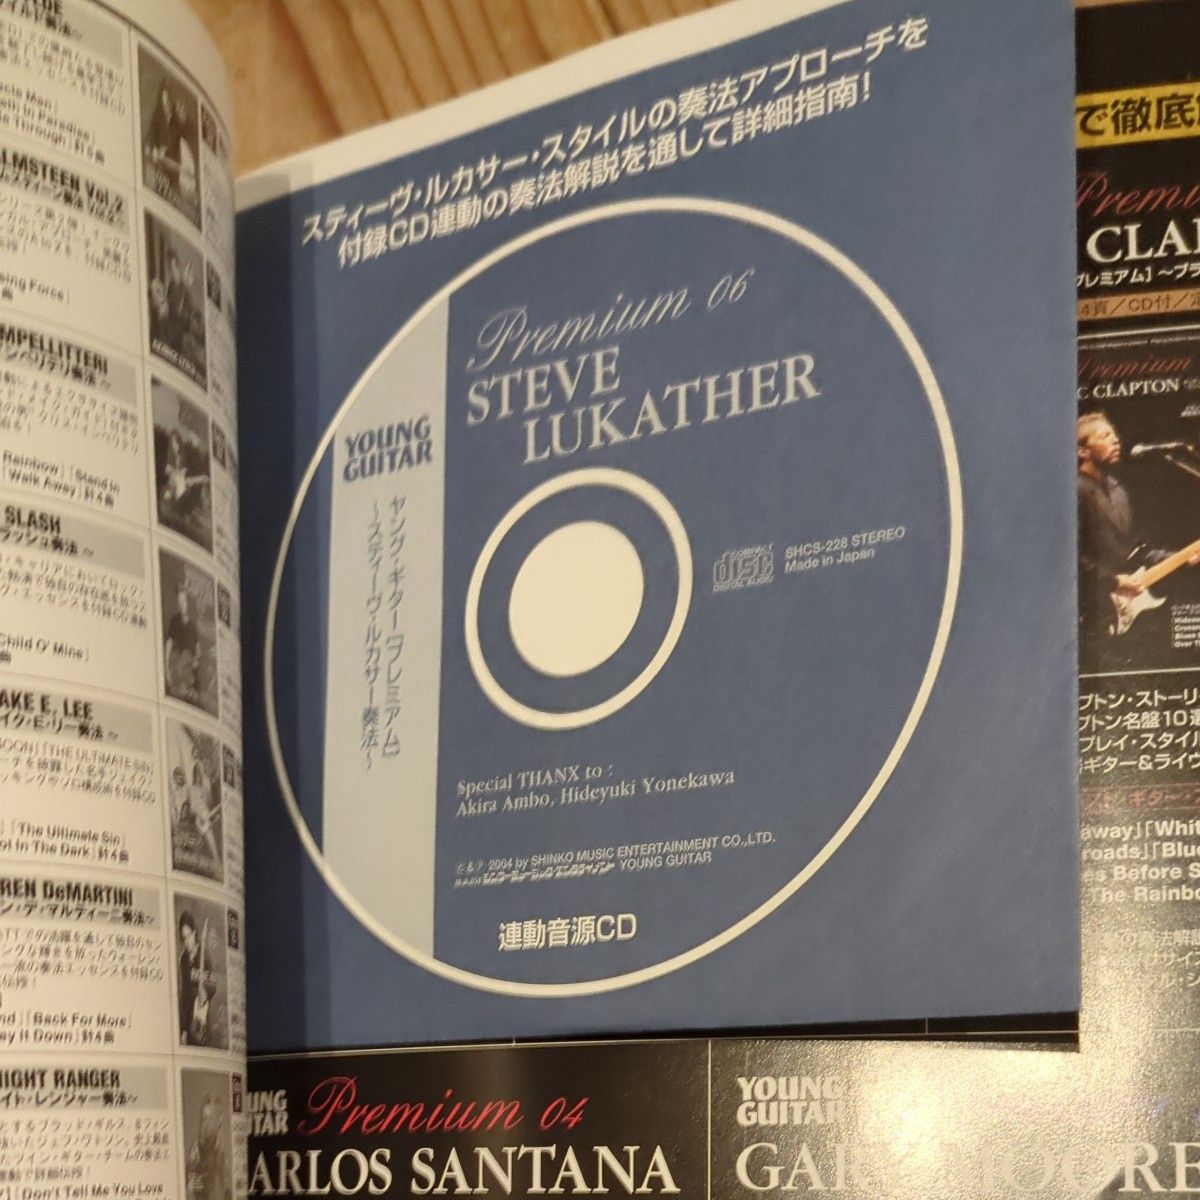 YOUNG GUITER STEAVE LUKATHER ヤング・ギター プレミアム　スティーブ　ルカサー奏法